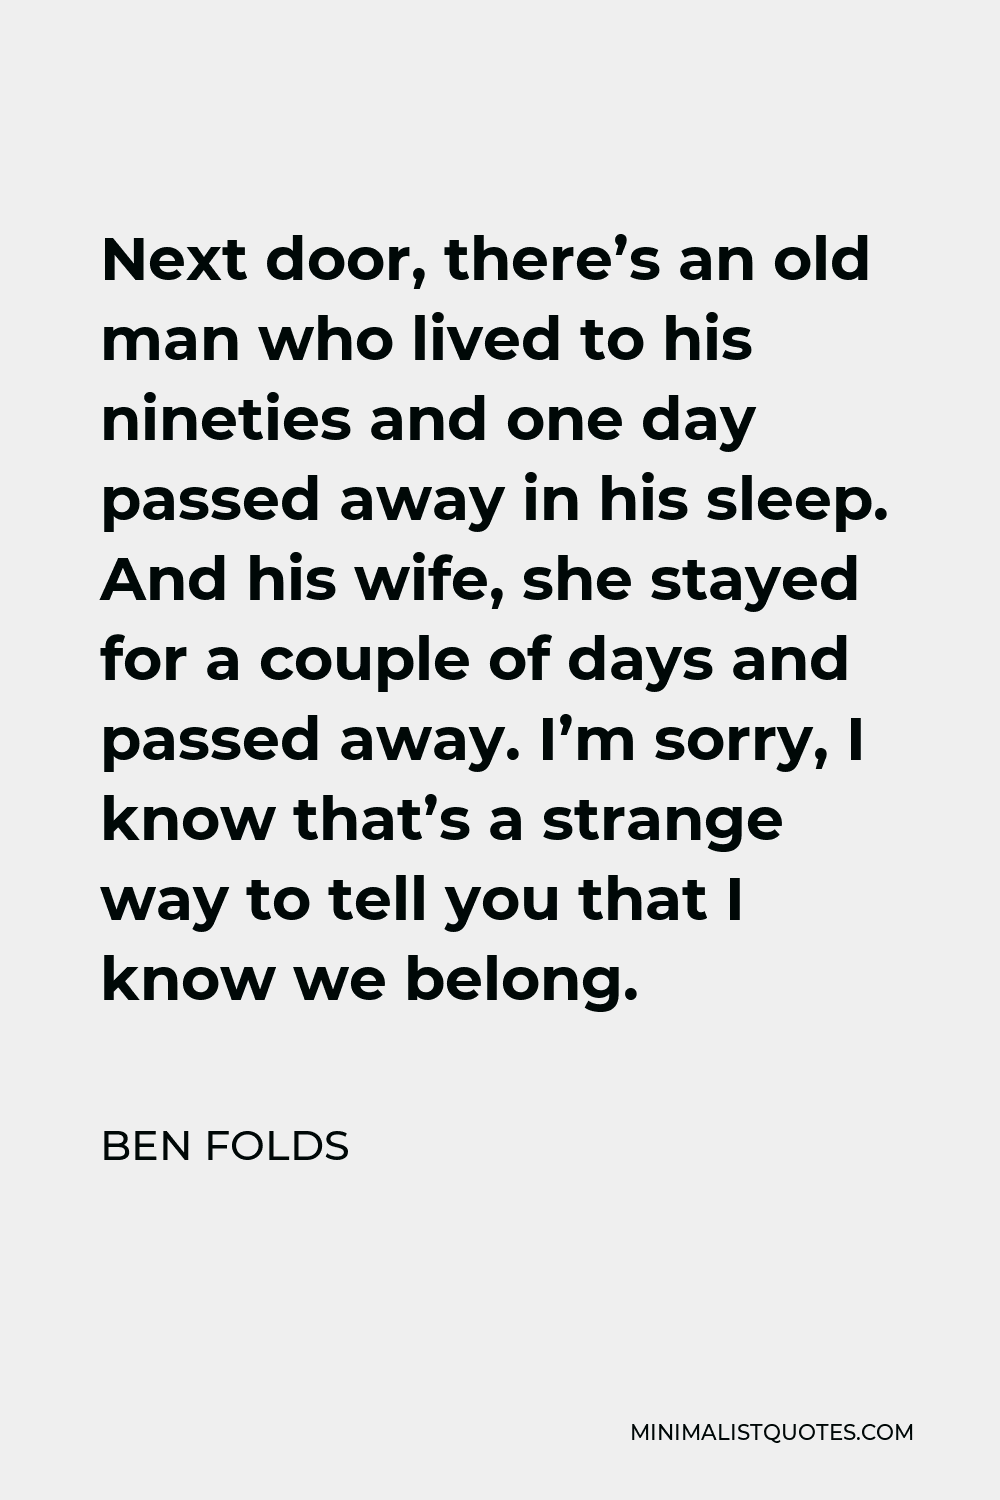 Ben Folds Quote - Next door, there’s an old man who lived to his nineties and one day passed away in his sleep. And his wife, she stayed for a couple of days and passed away. I’m sorry, I know that’s a strange way to tell you that I know we belong.